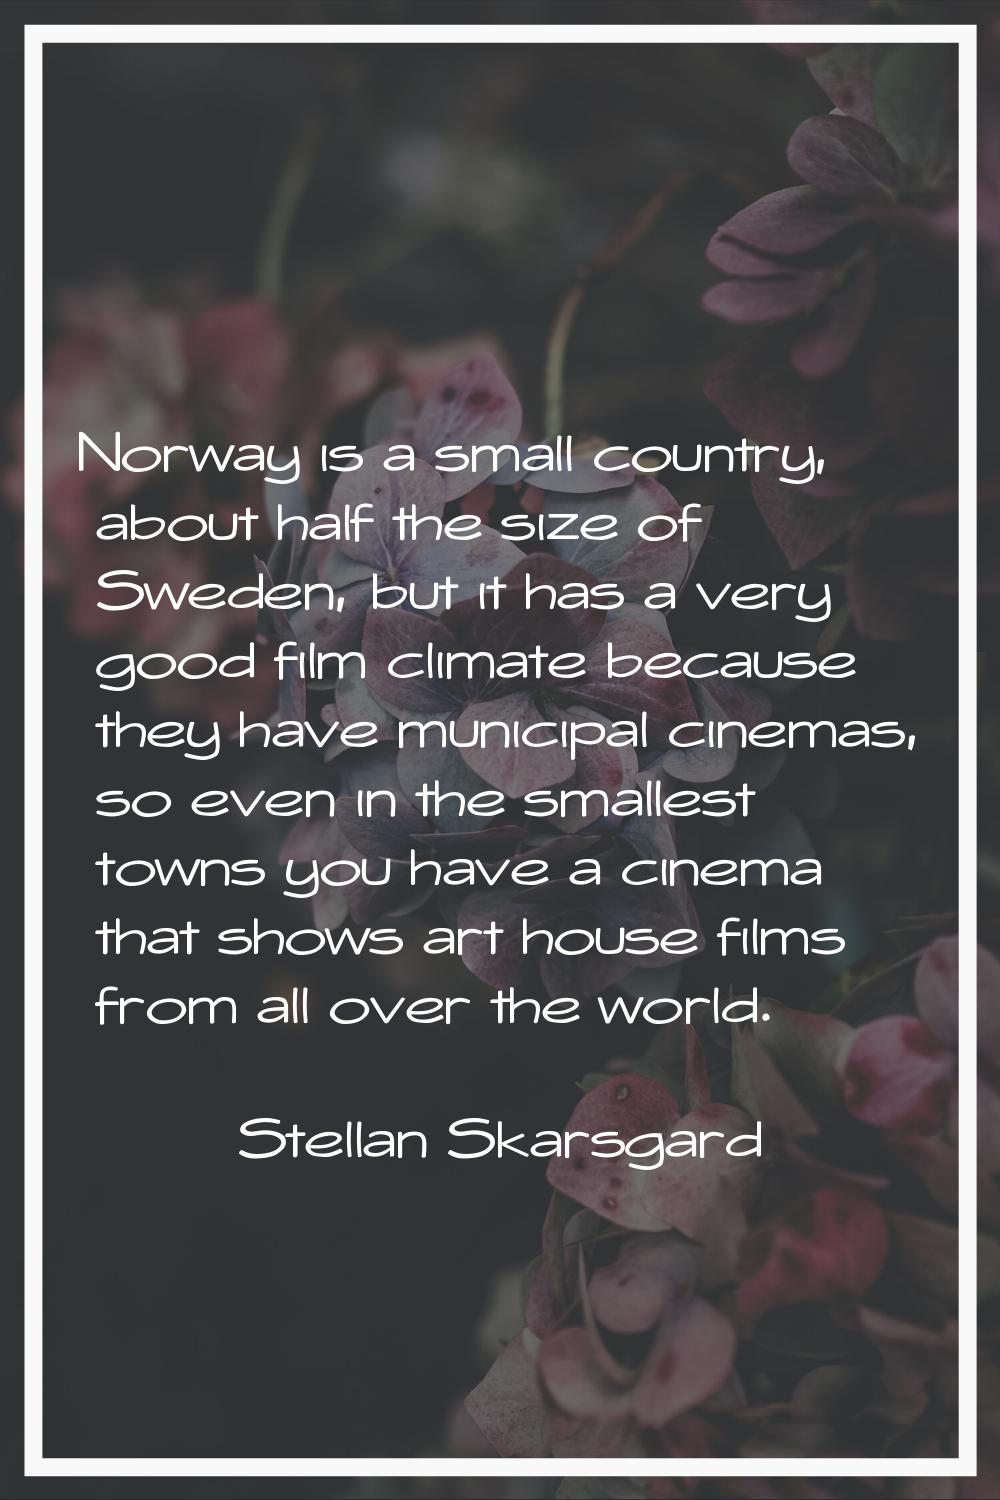 Norway is a small country, about half the size of Sweden, but it has a very good film climate becau